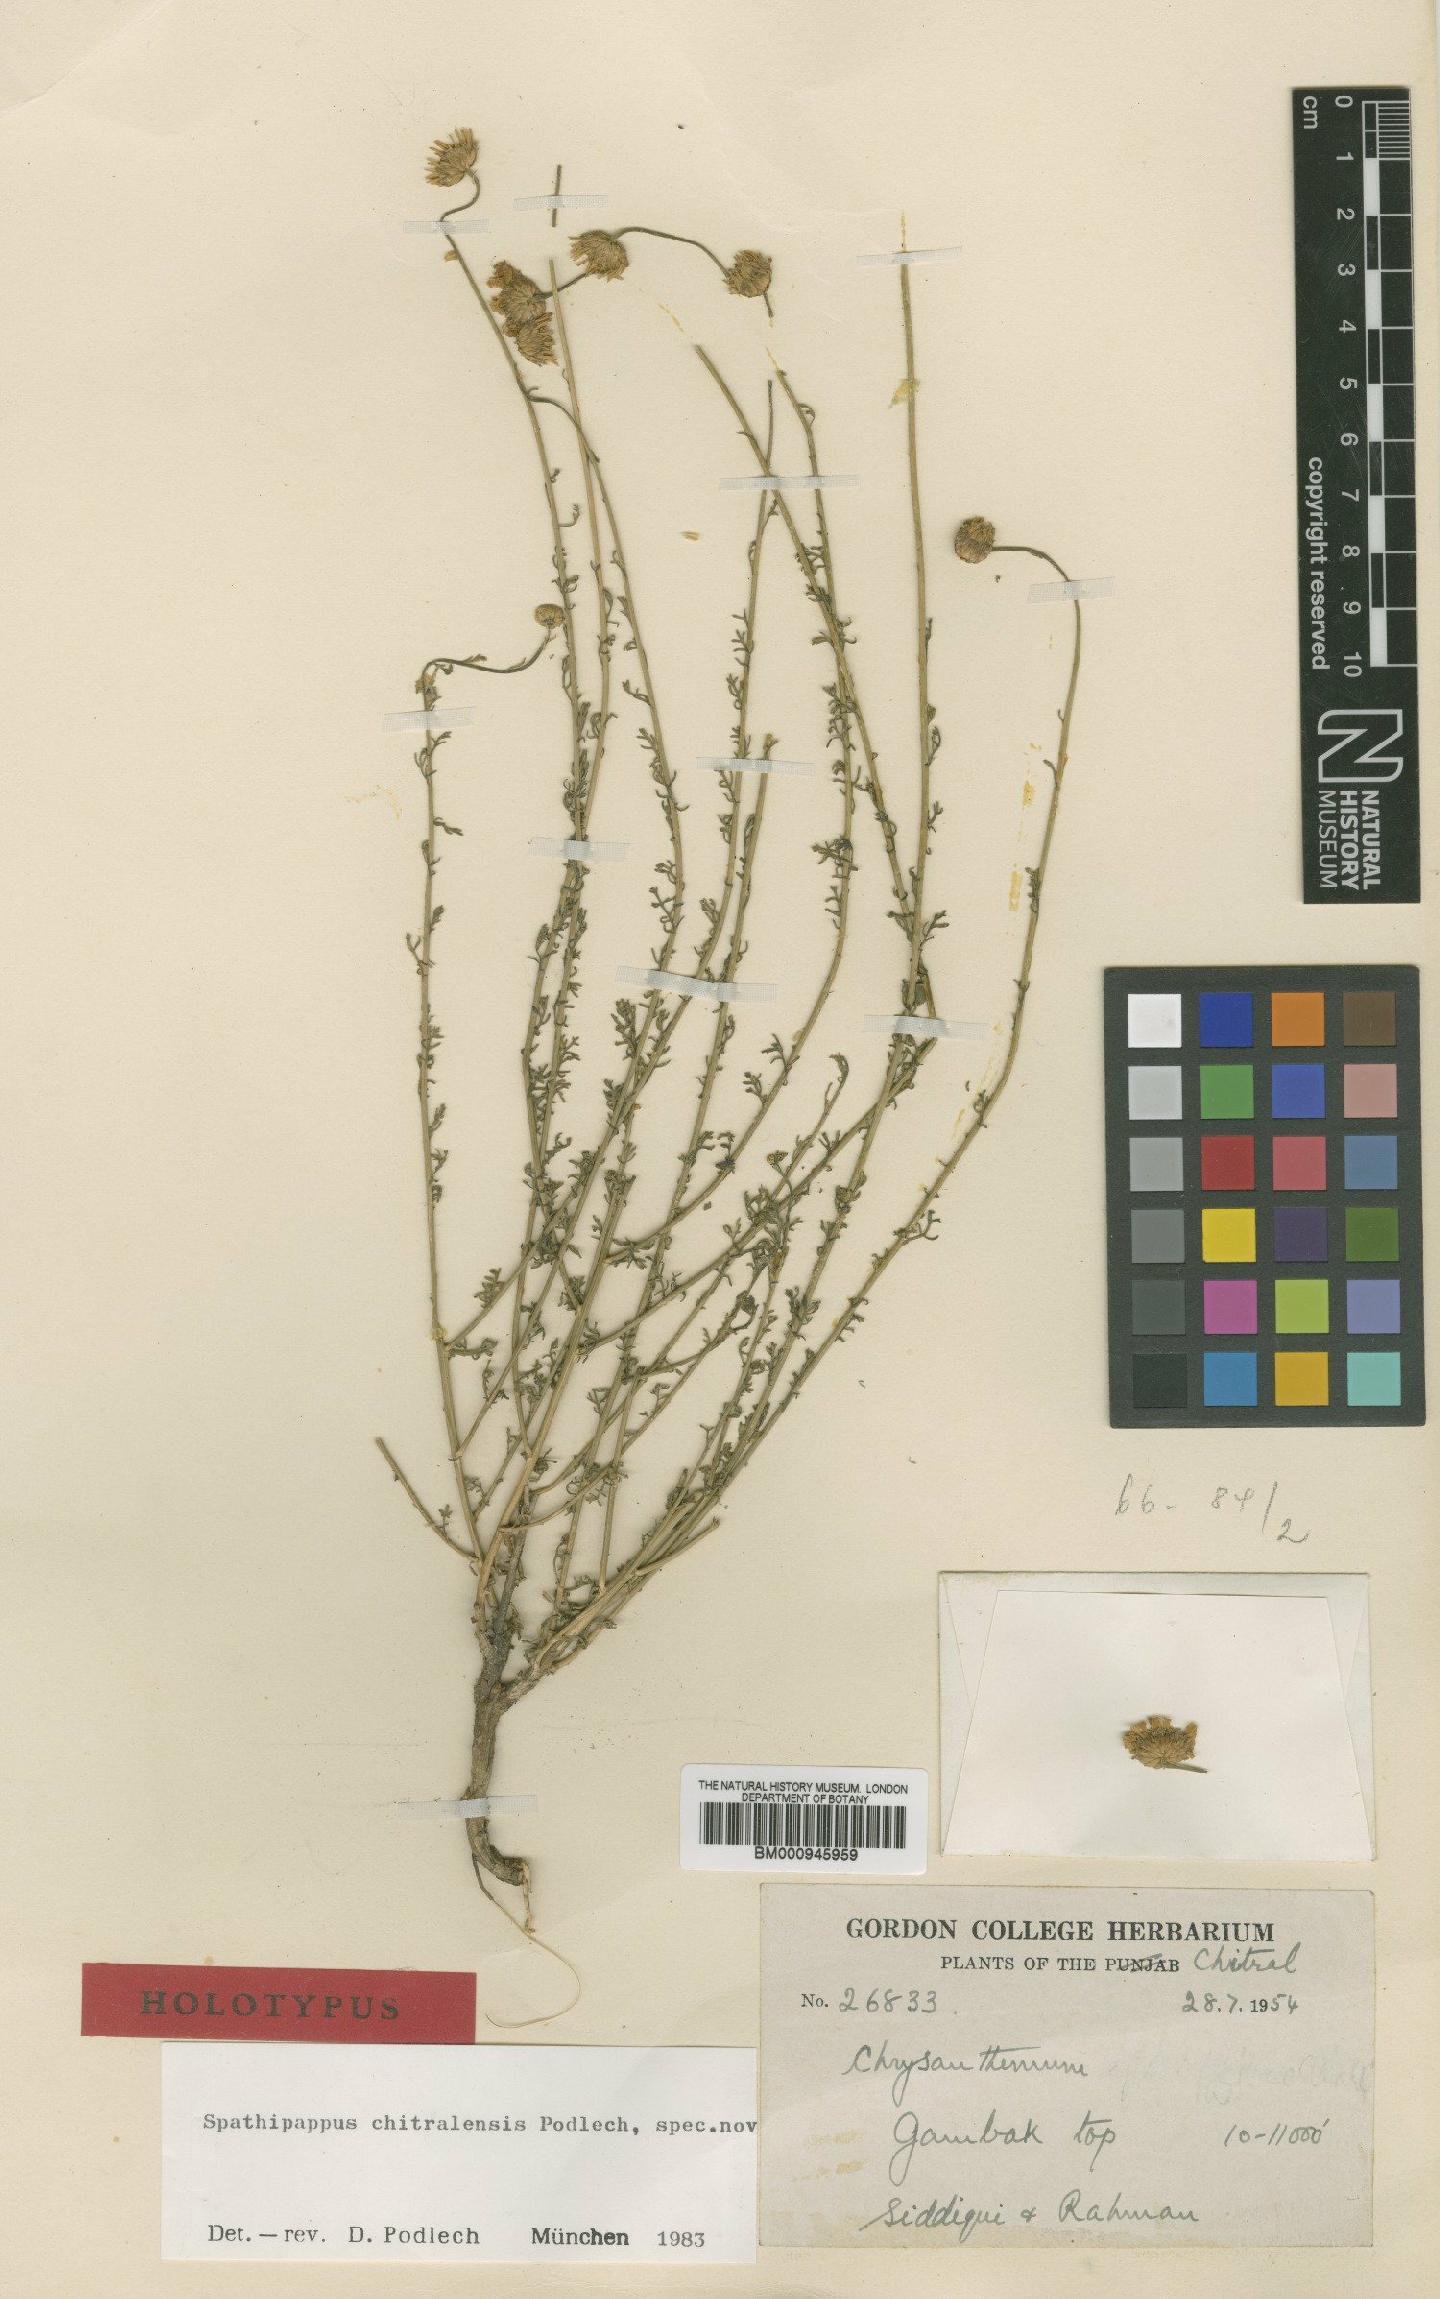 To NHMUK collection (Spathipappus chitralensis Podlech; Holotype; NHMUK:ecatalogue:473938)